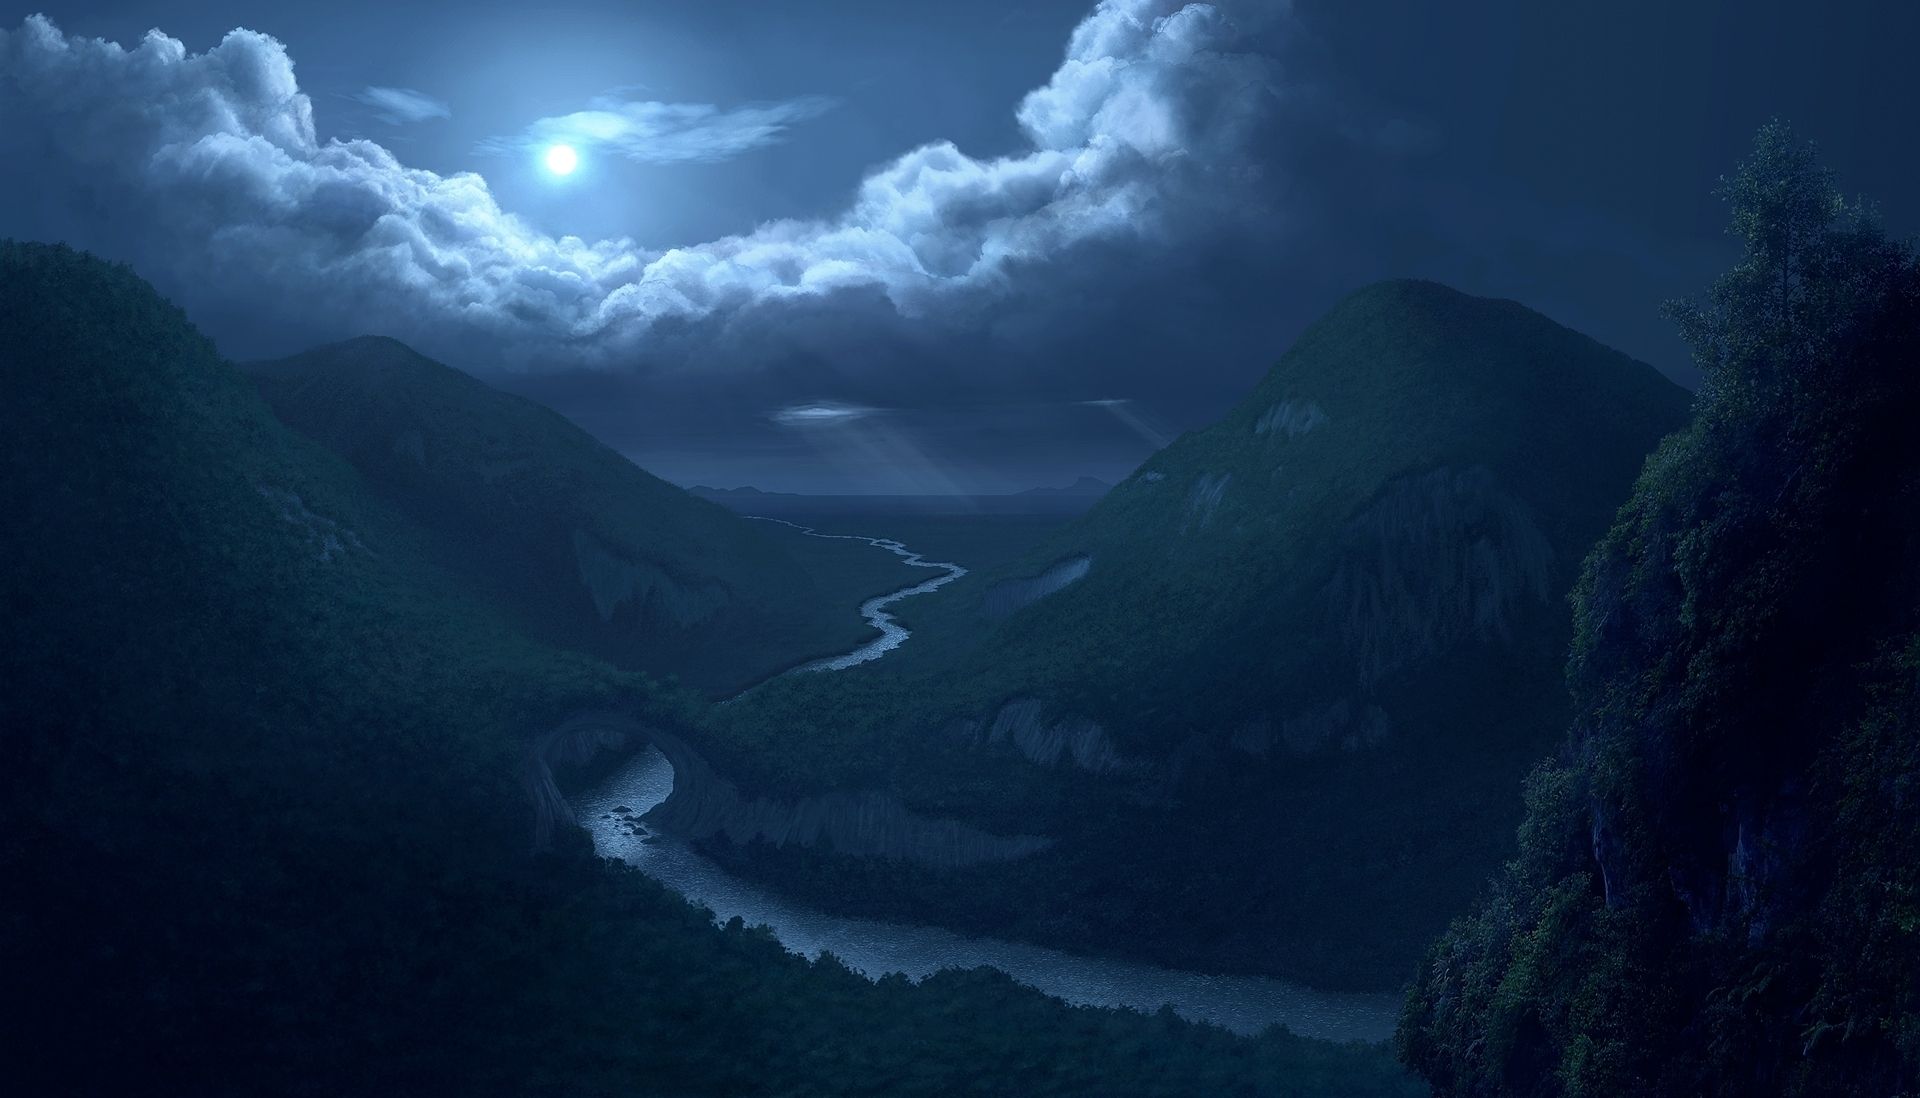 River Near Mountains In Night View Wallpapers